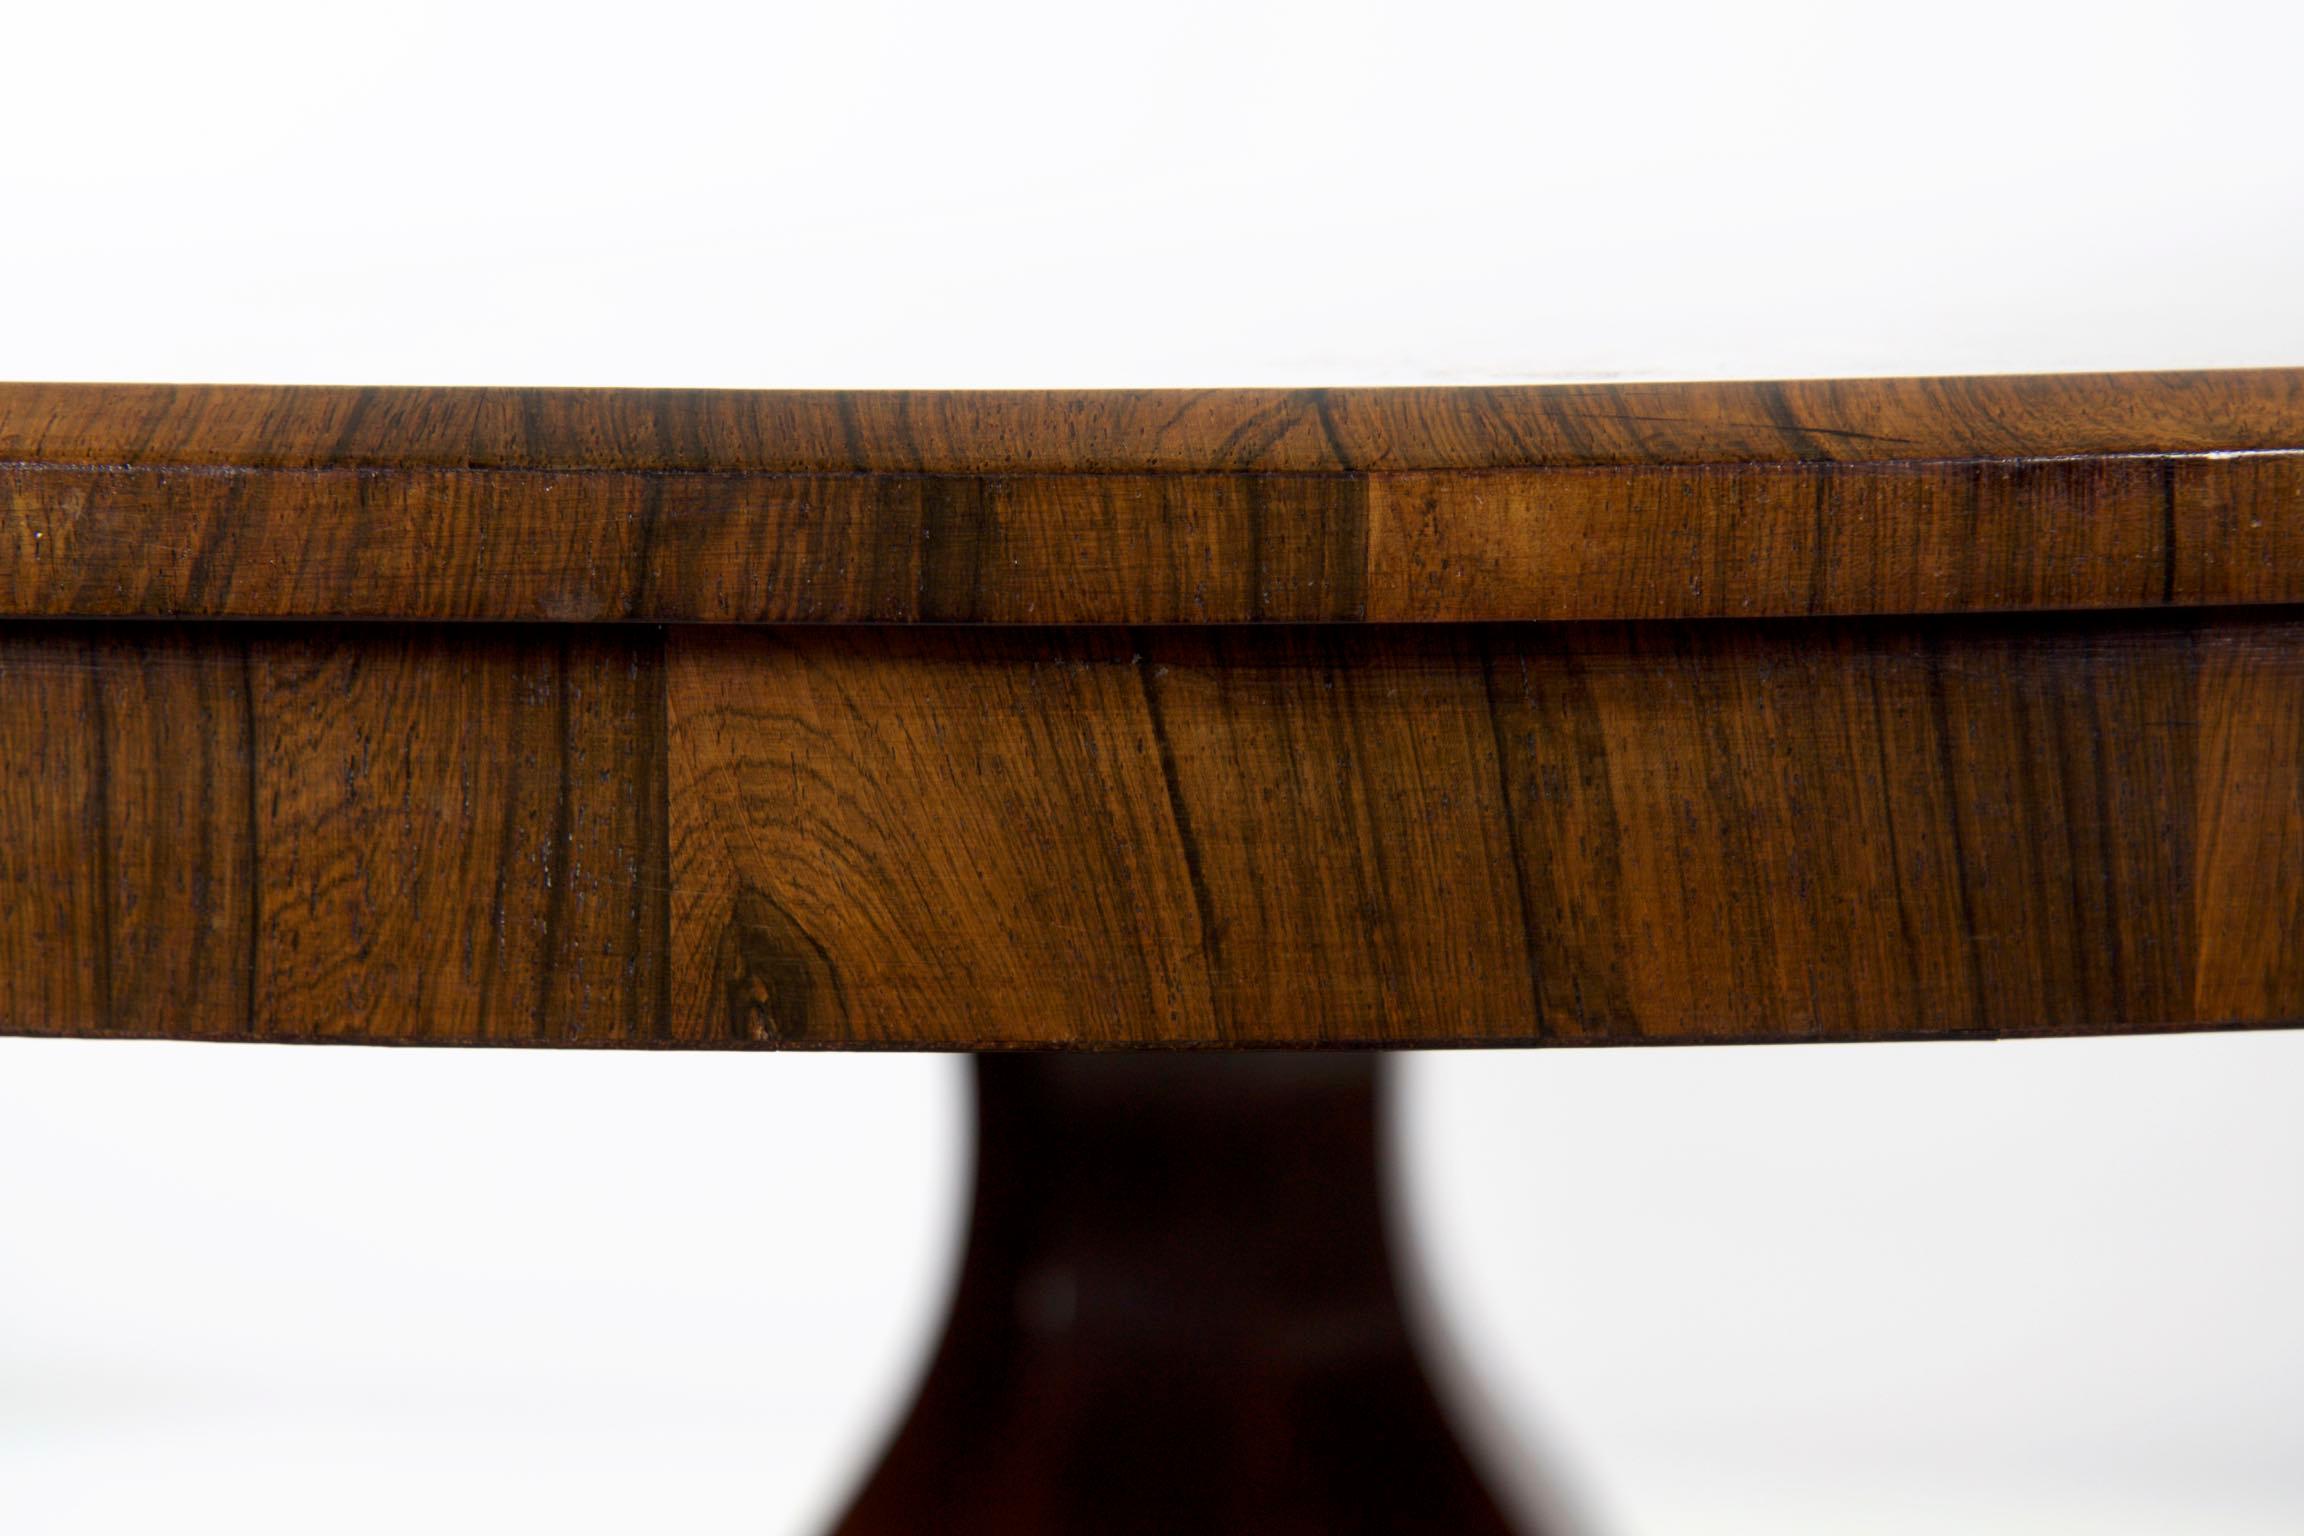 An exceptional William IV rosewood circular dining table
London, circa 1830

This superior circular dining table is crafted of the finest grade of materials throughout. A product of the William IV period, the table was likely crafted in London